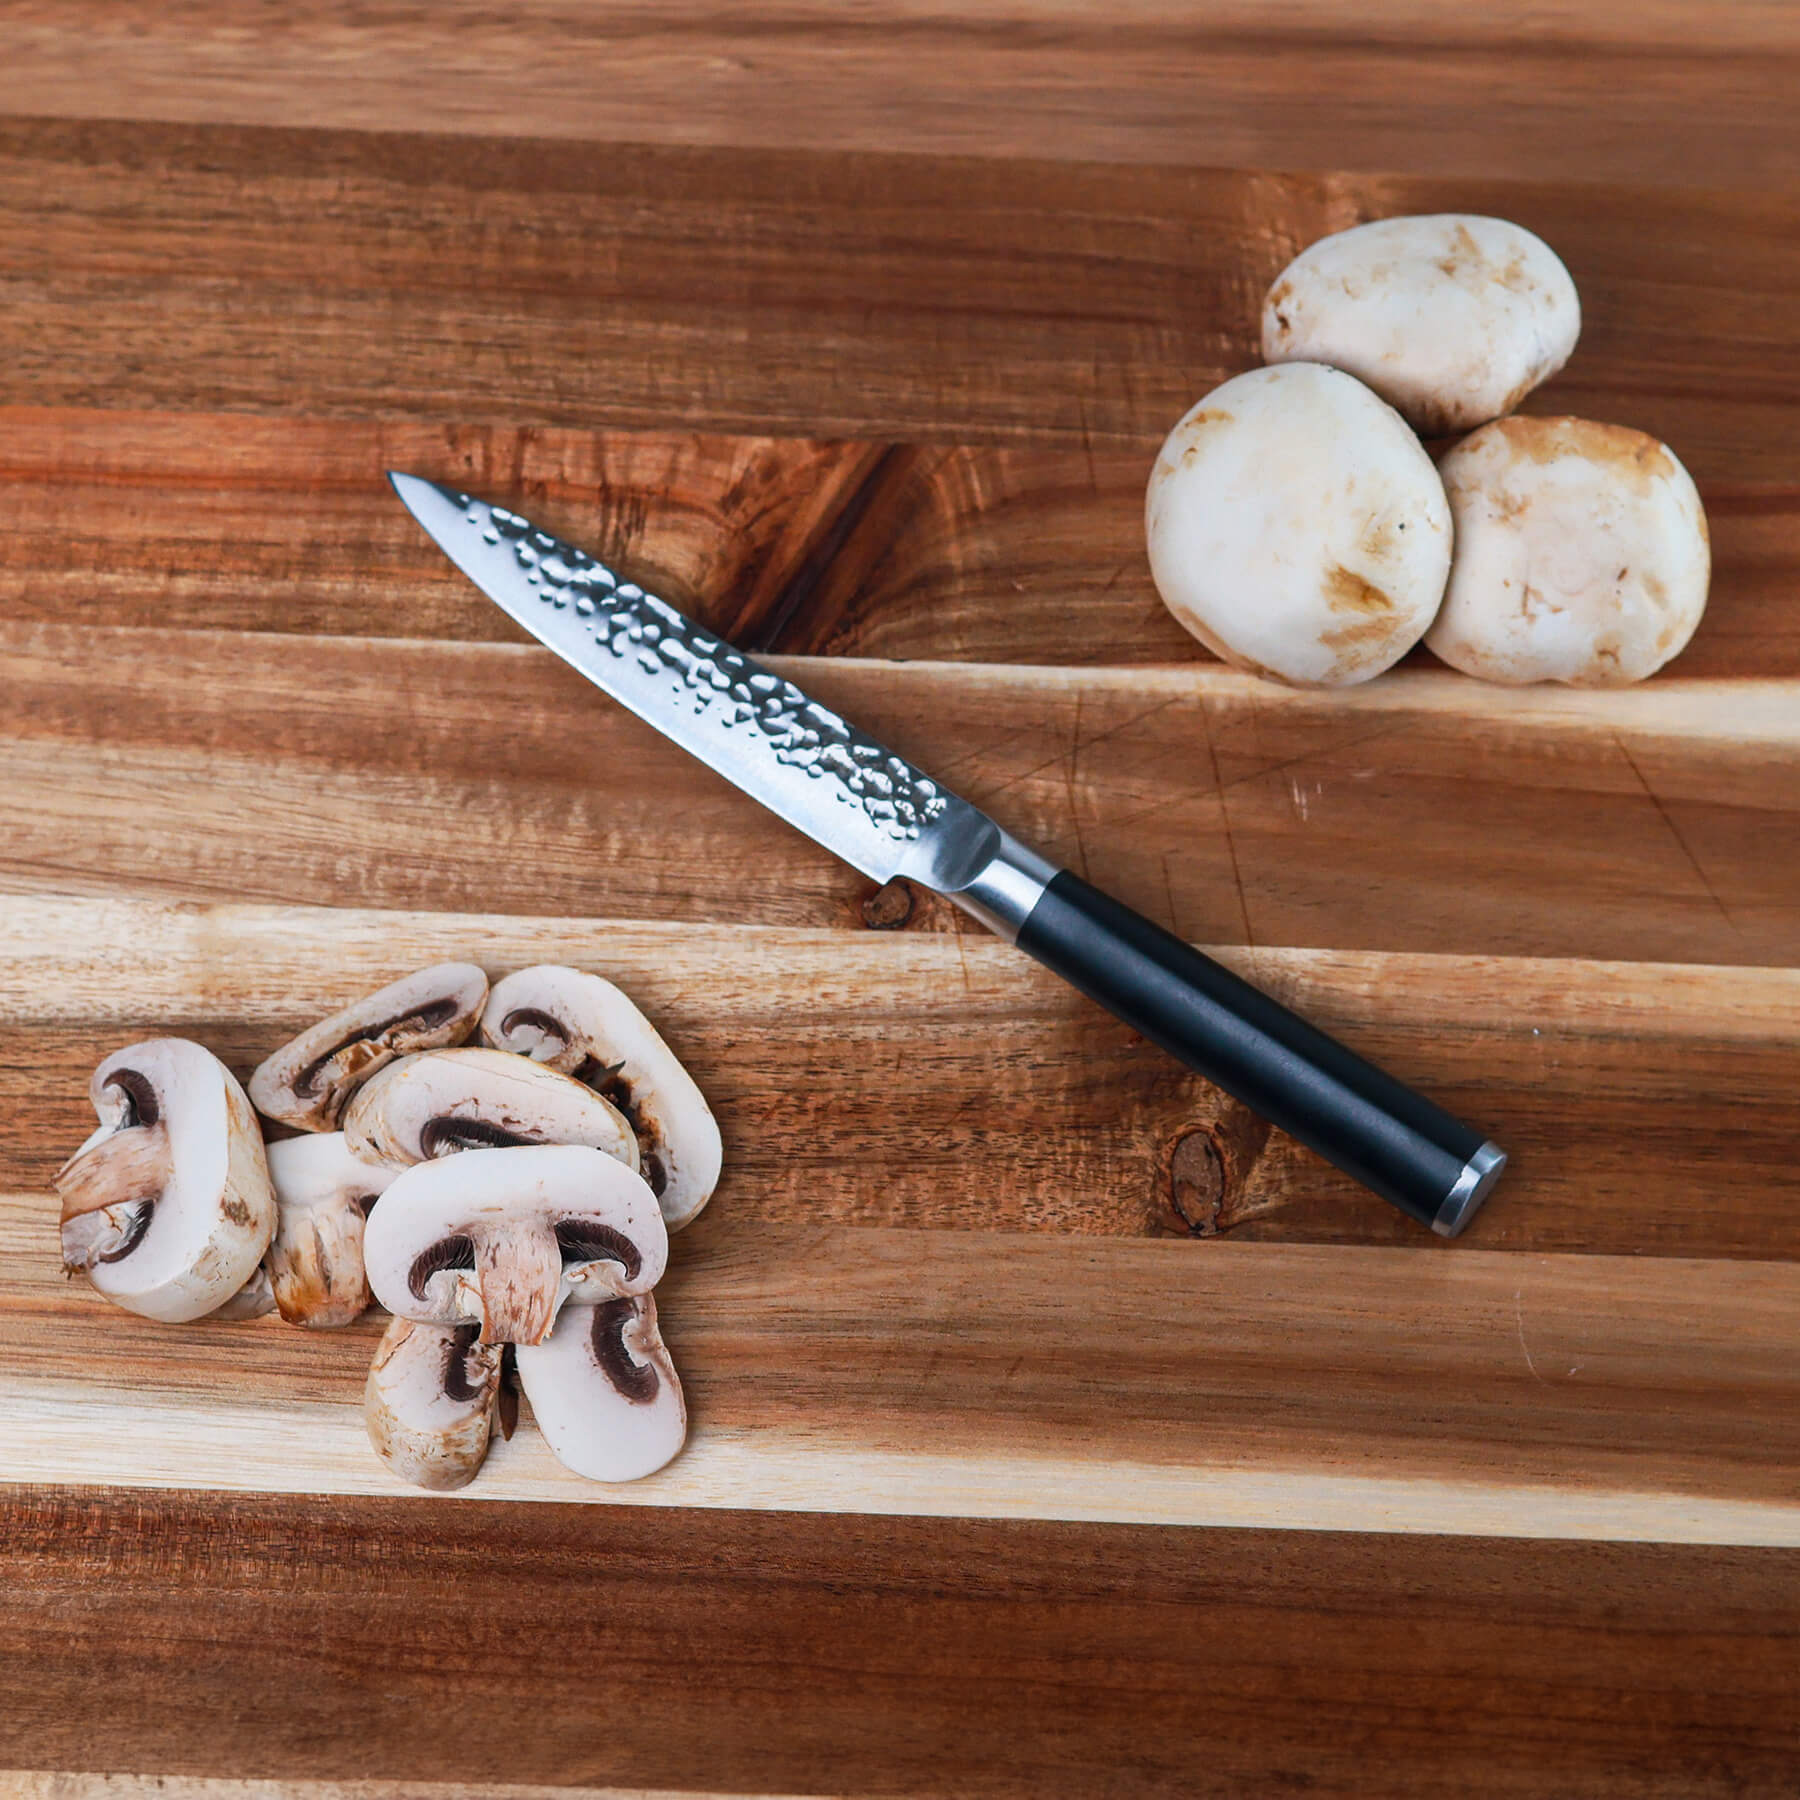 5" Hammered Utility Knife on wooden cutting board with sliced mushrooms